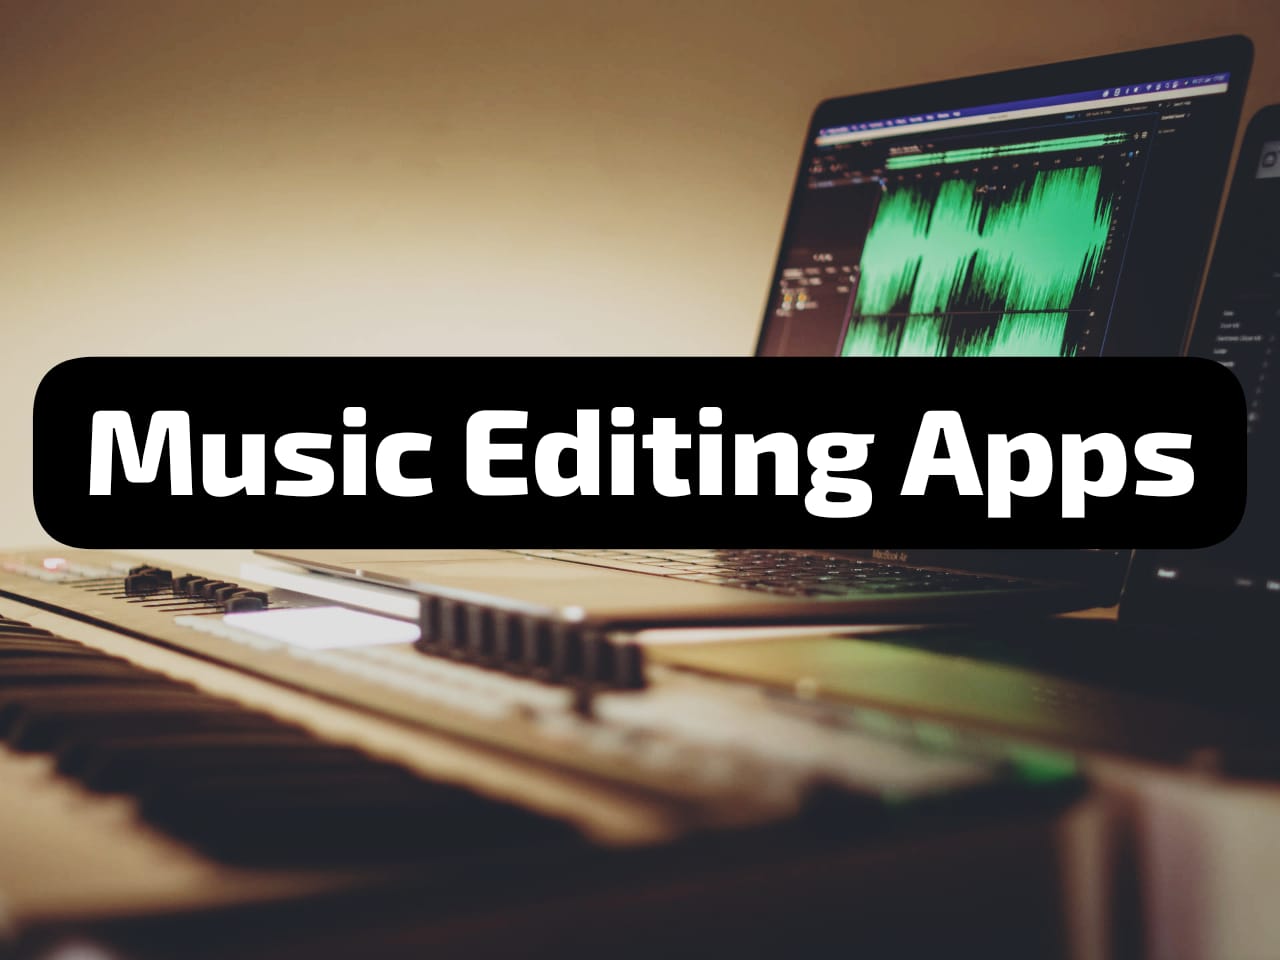 What Are Apps Which You Can Use For Audio or Music Editing?